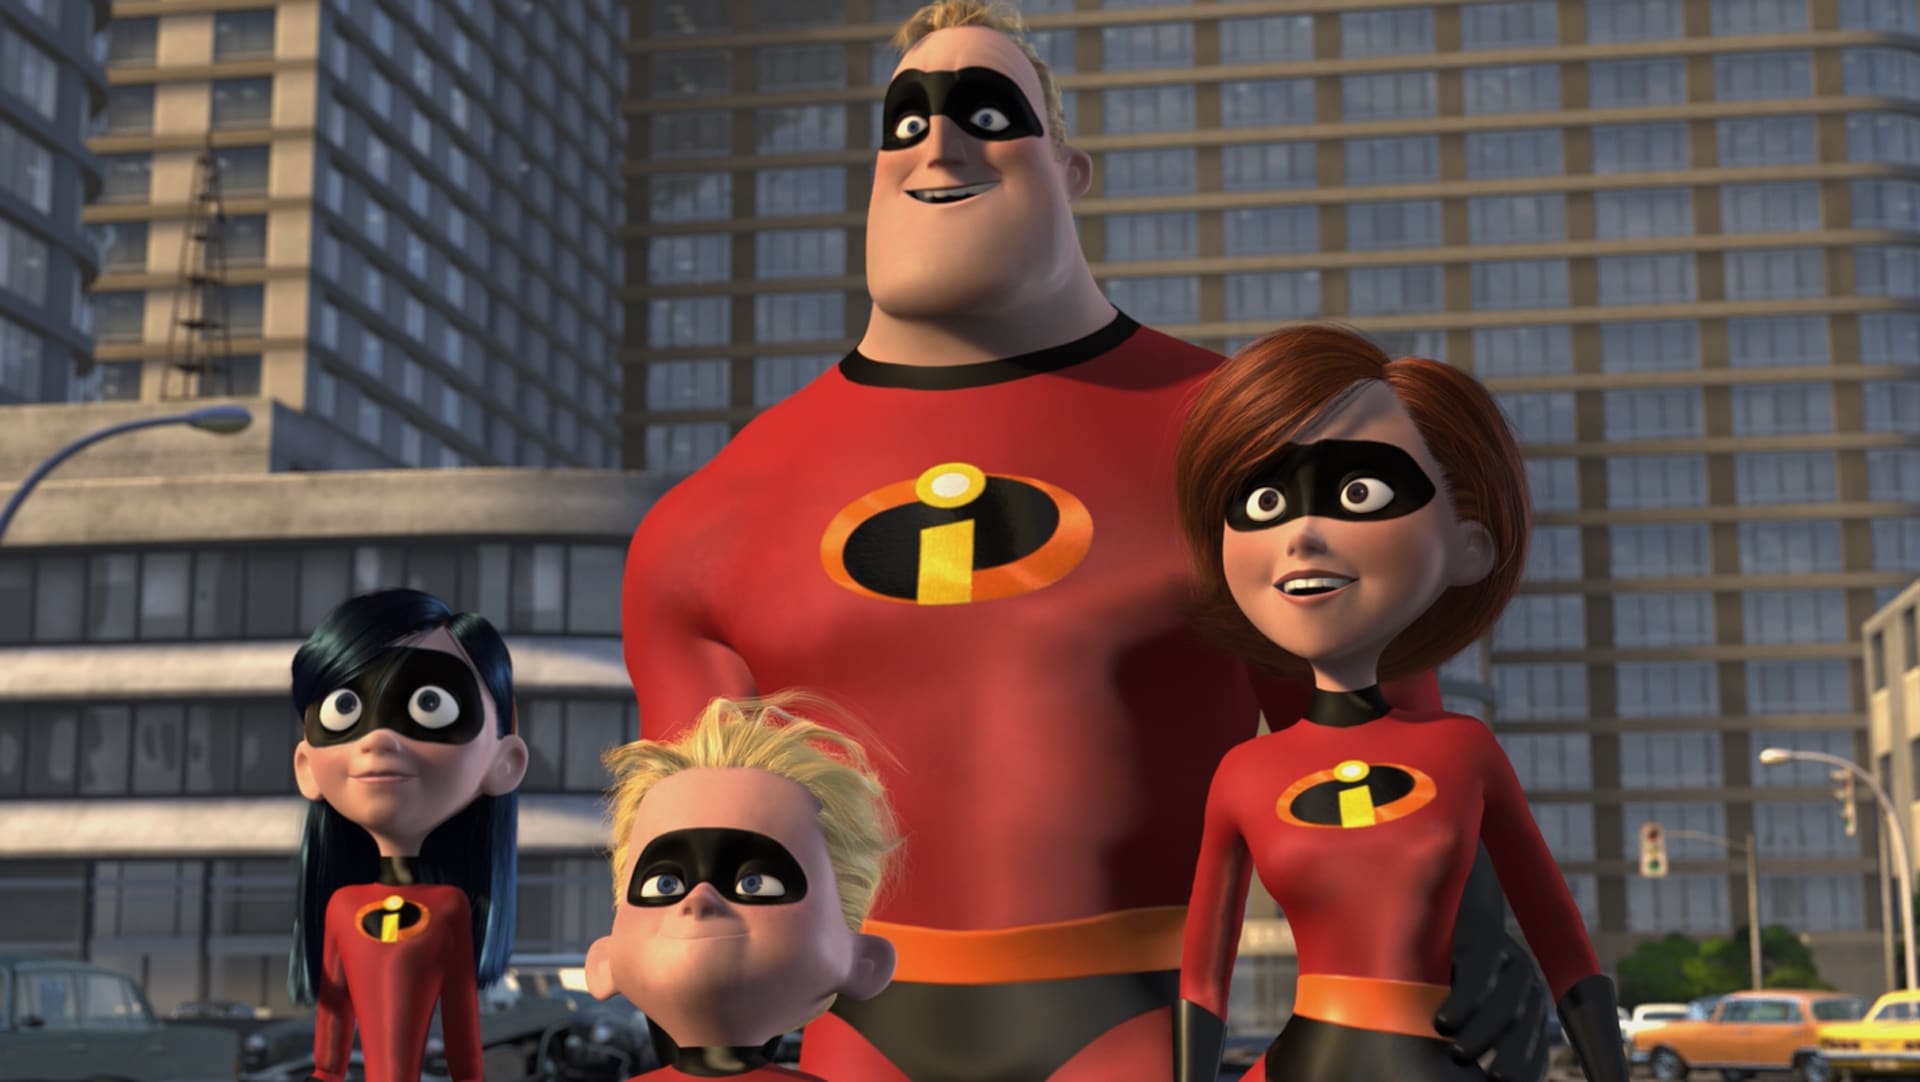 Incredibles 2 - Meet the Characters